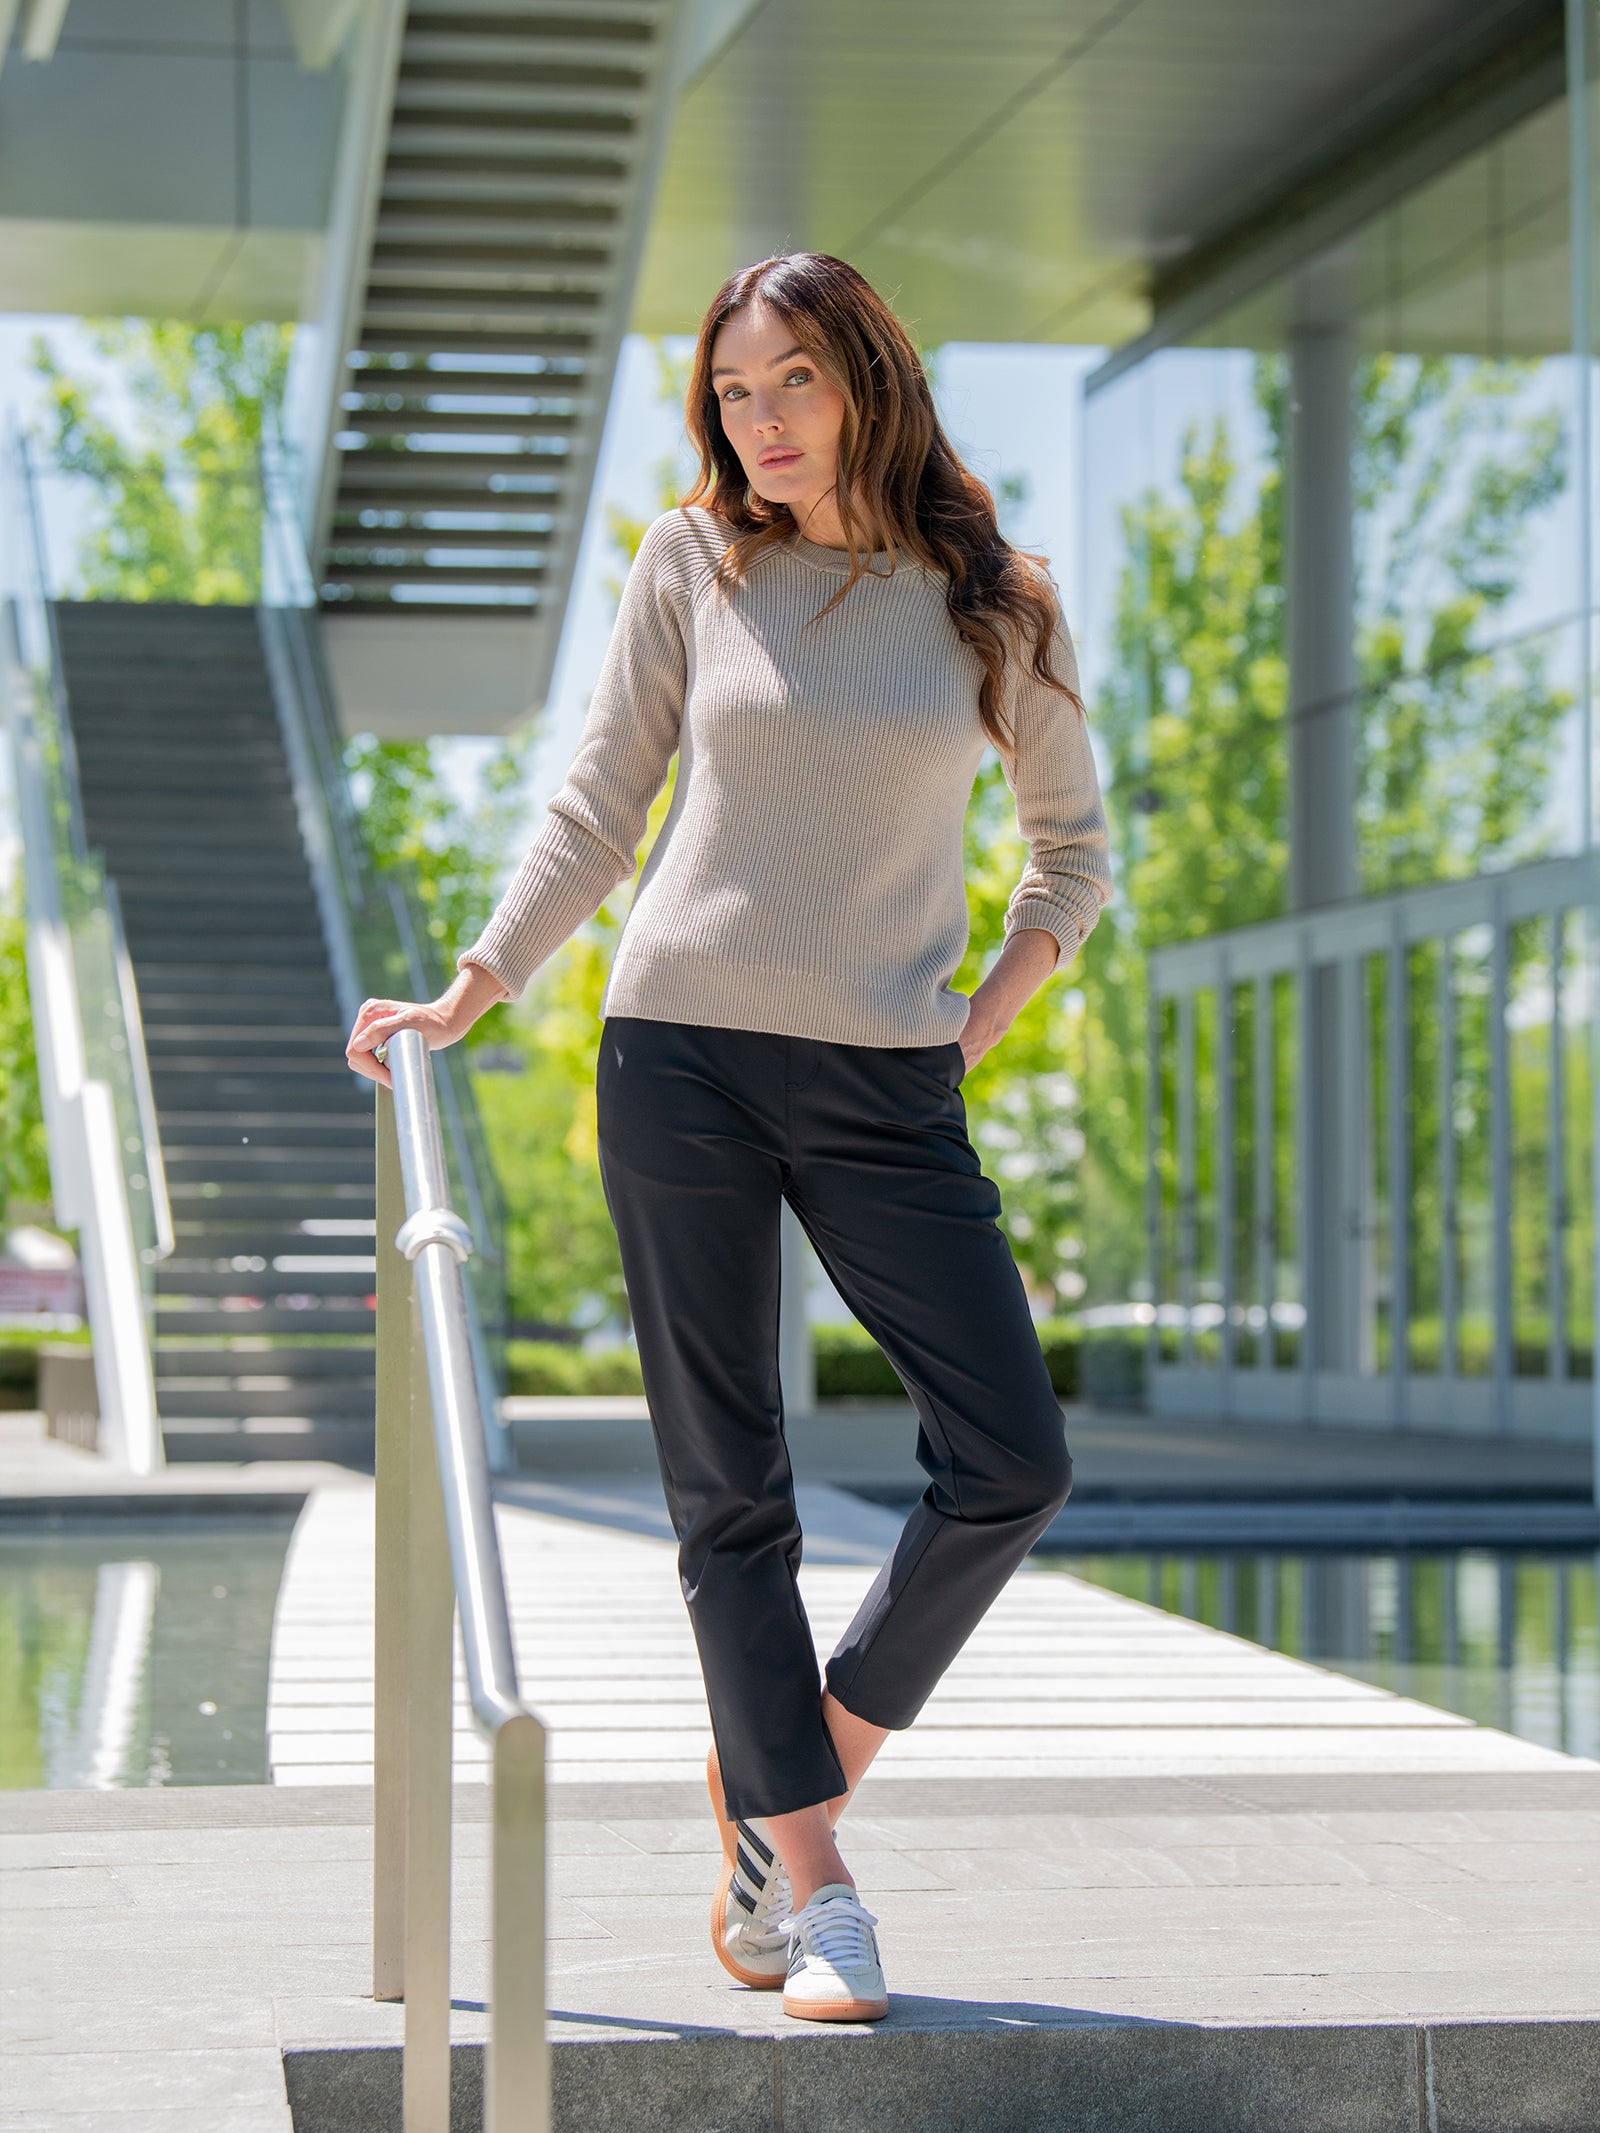 A person in Cozy Earth's Women's Classic Crewneck and black pants stands outdoors on a walkway by a railing. They have one hand on the railing and the other in their pocket. They are under a modern building structure featuring glass and metal elements, with greenery visible around. 